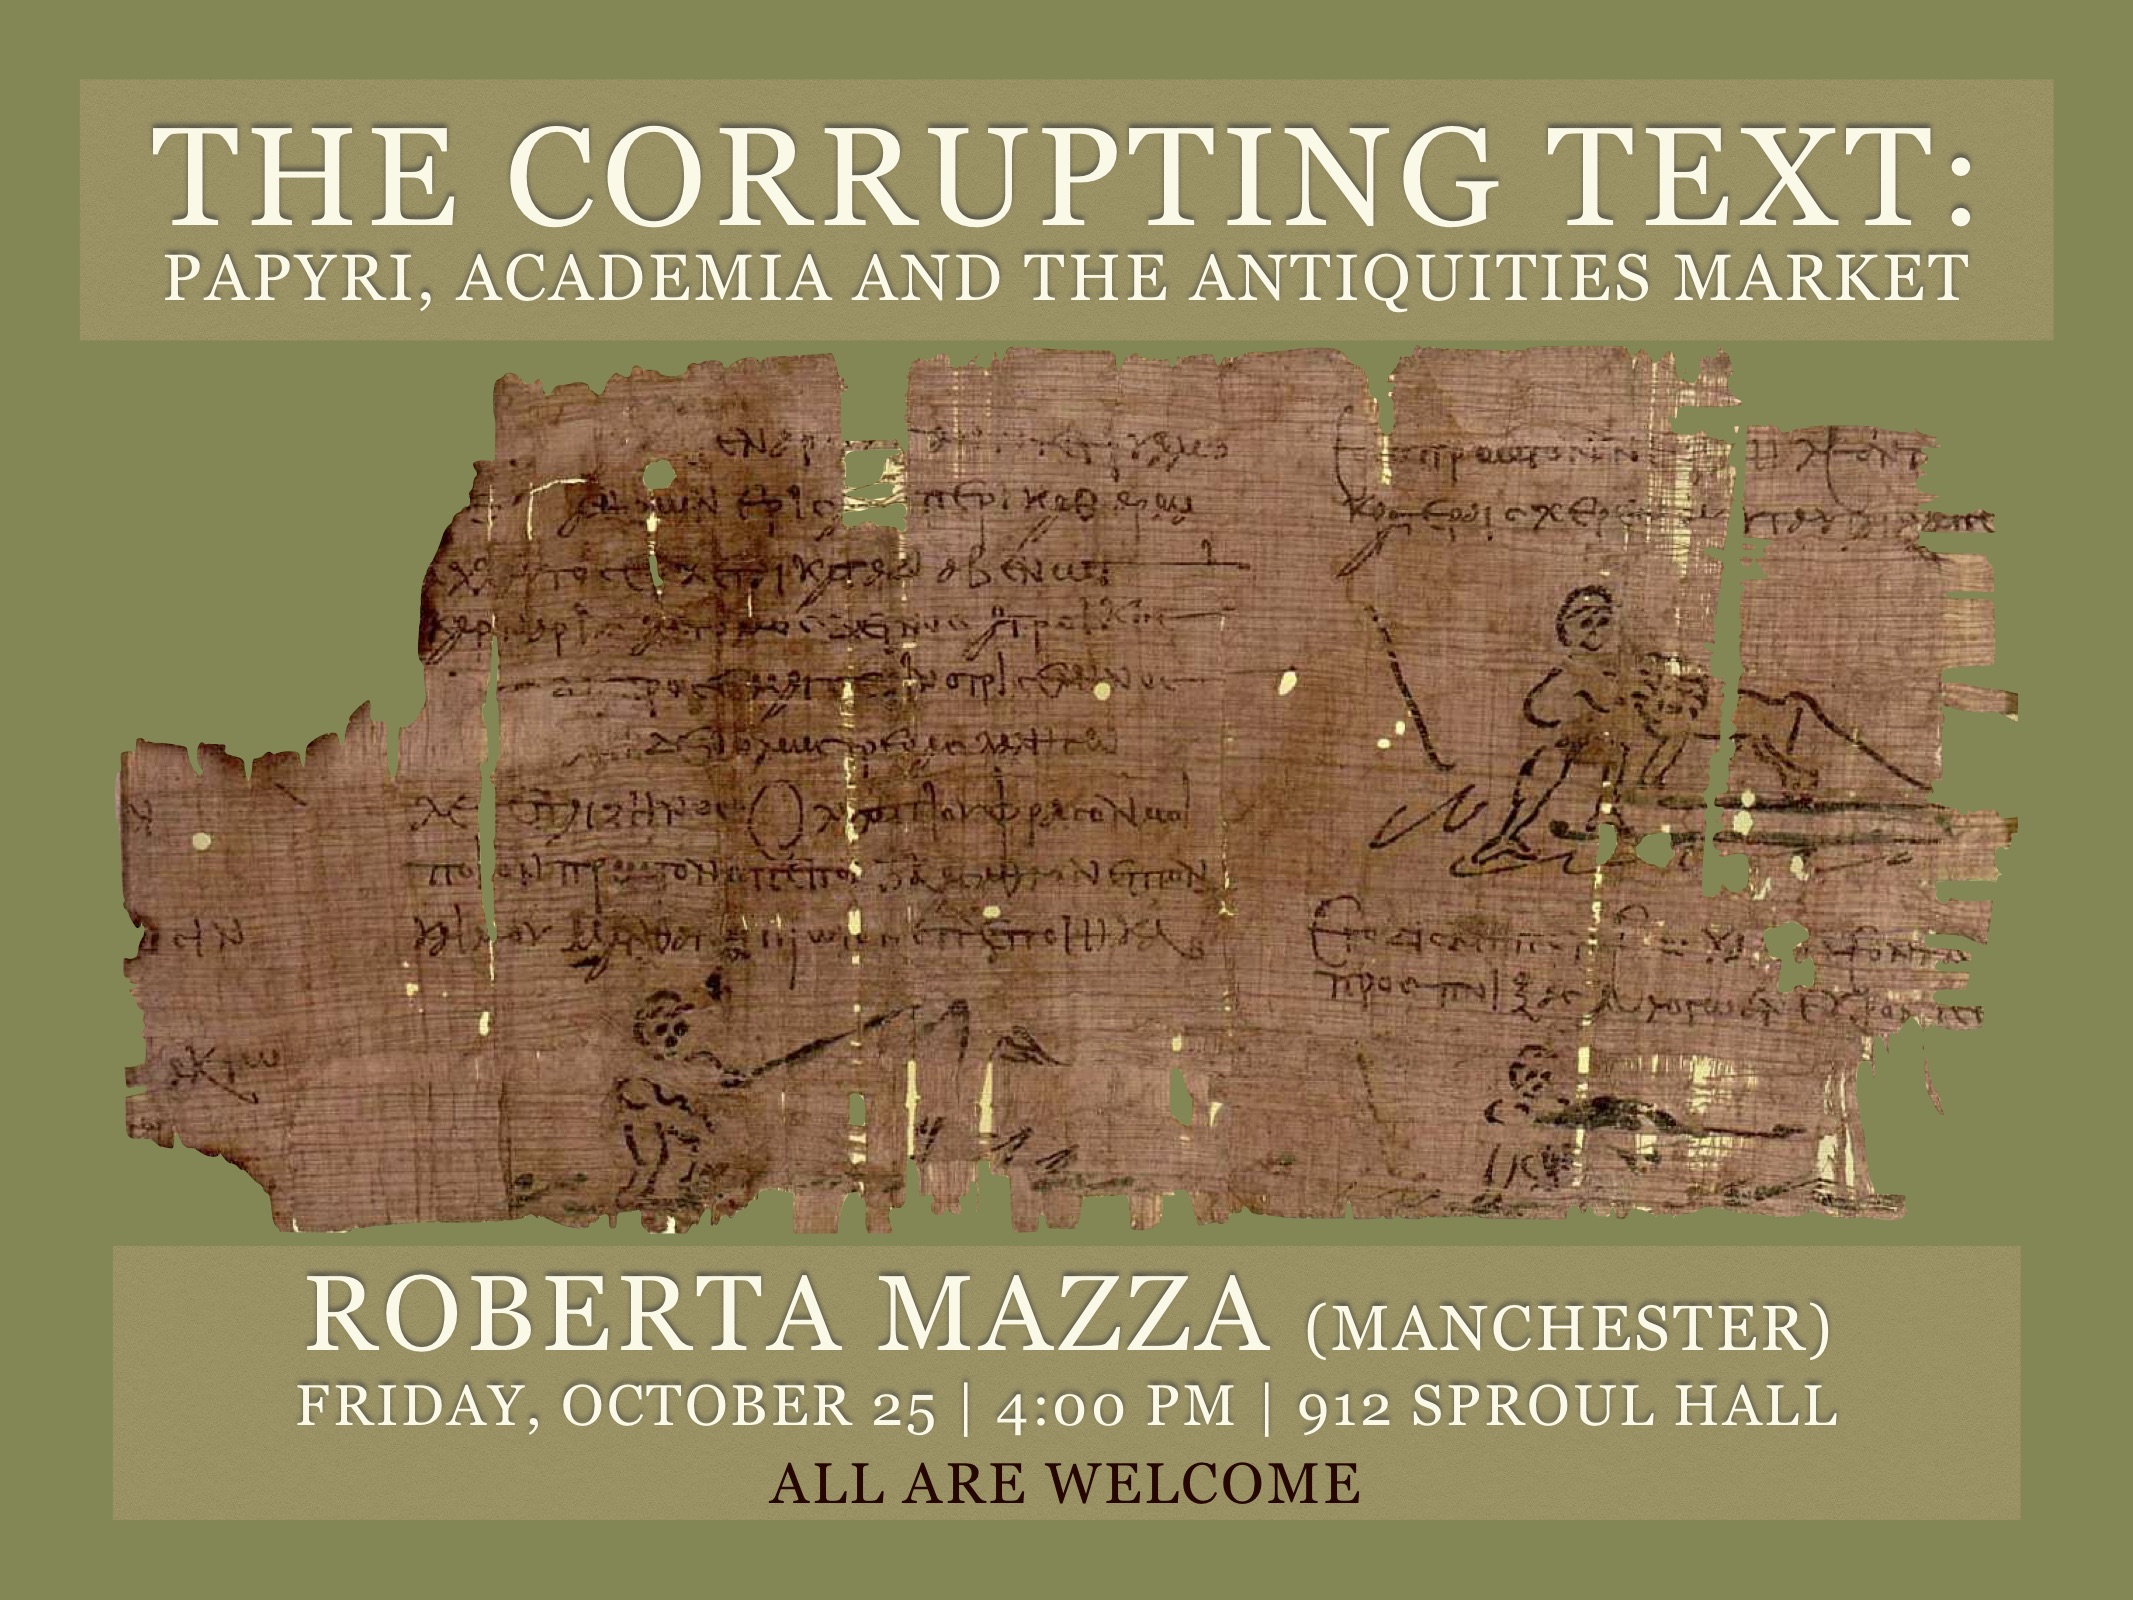 Come hear Roberta Mazza discuss the darker sides of ancient studies: The Corrupting Text: Papyri, Academia and the Antiquities Market  Friday October 25  4:00pm  912 Sproul Hall